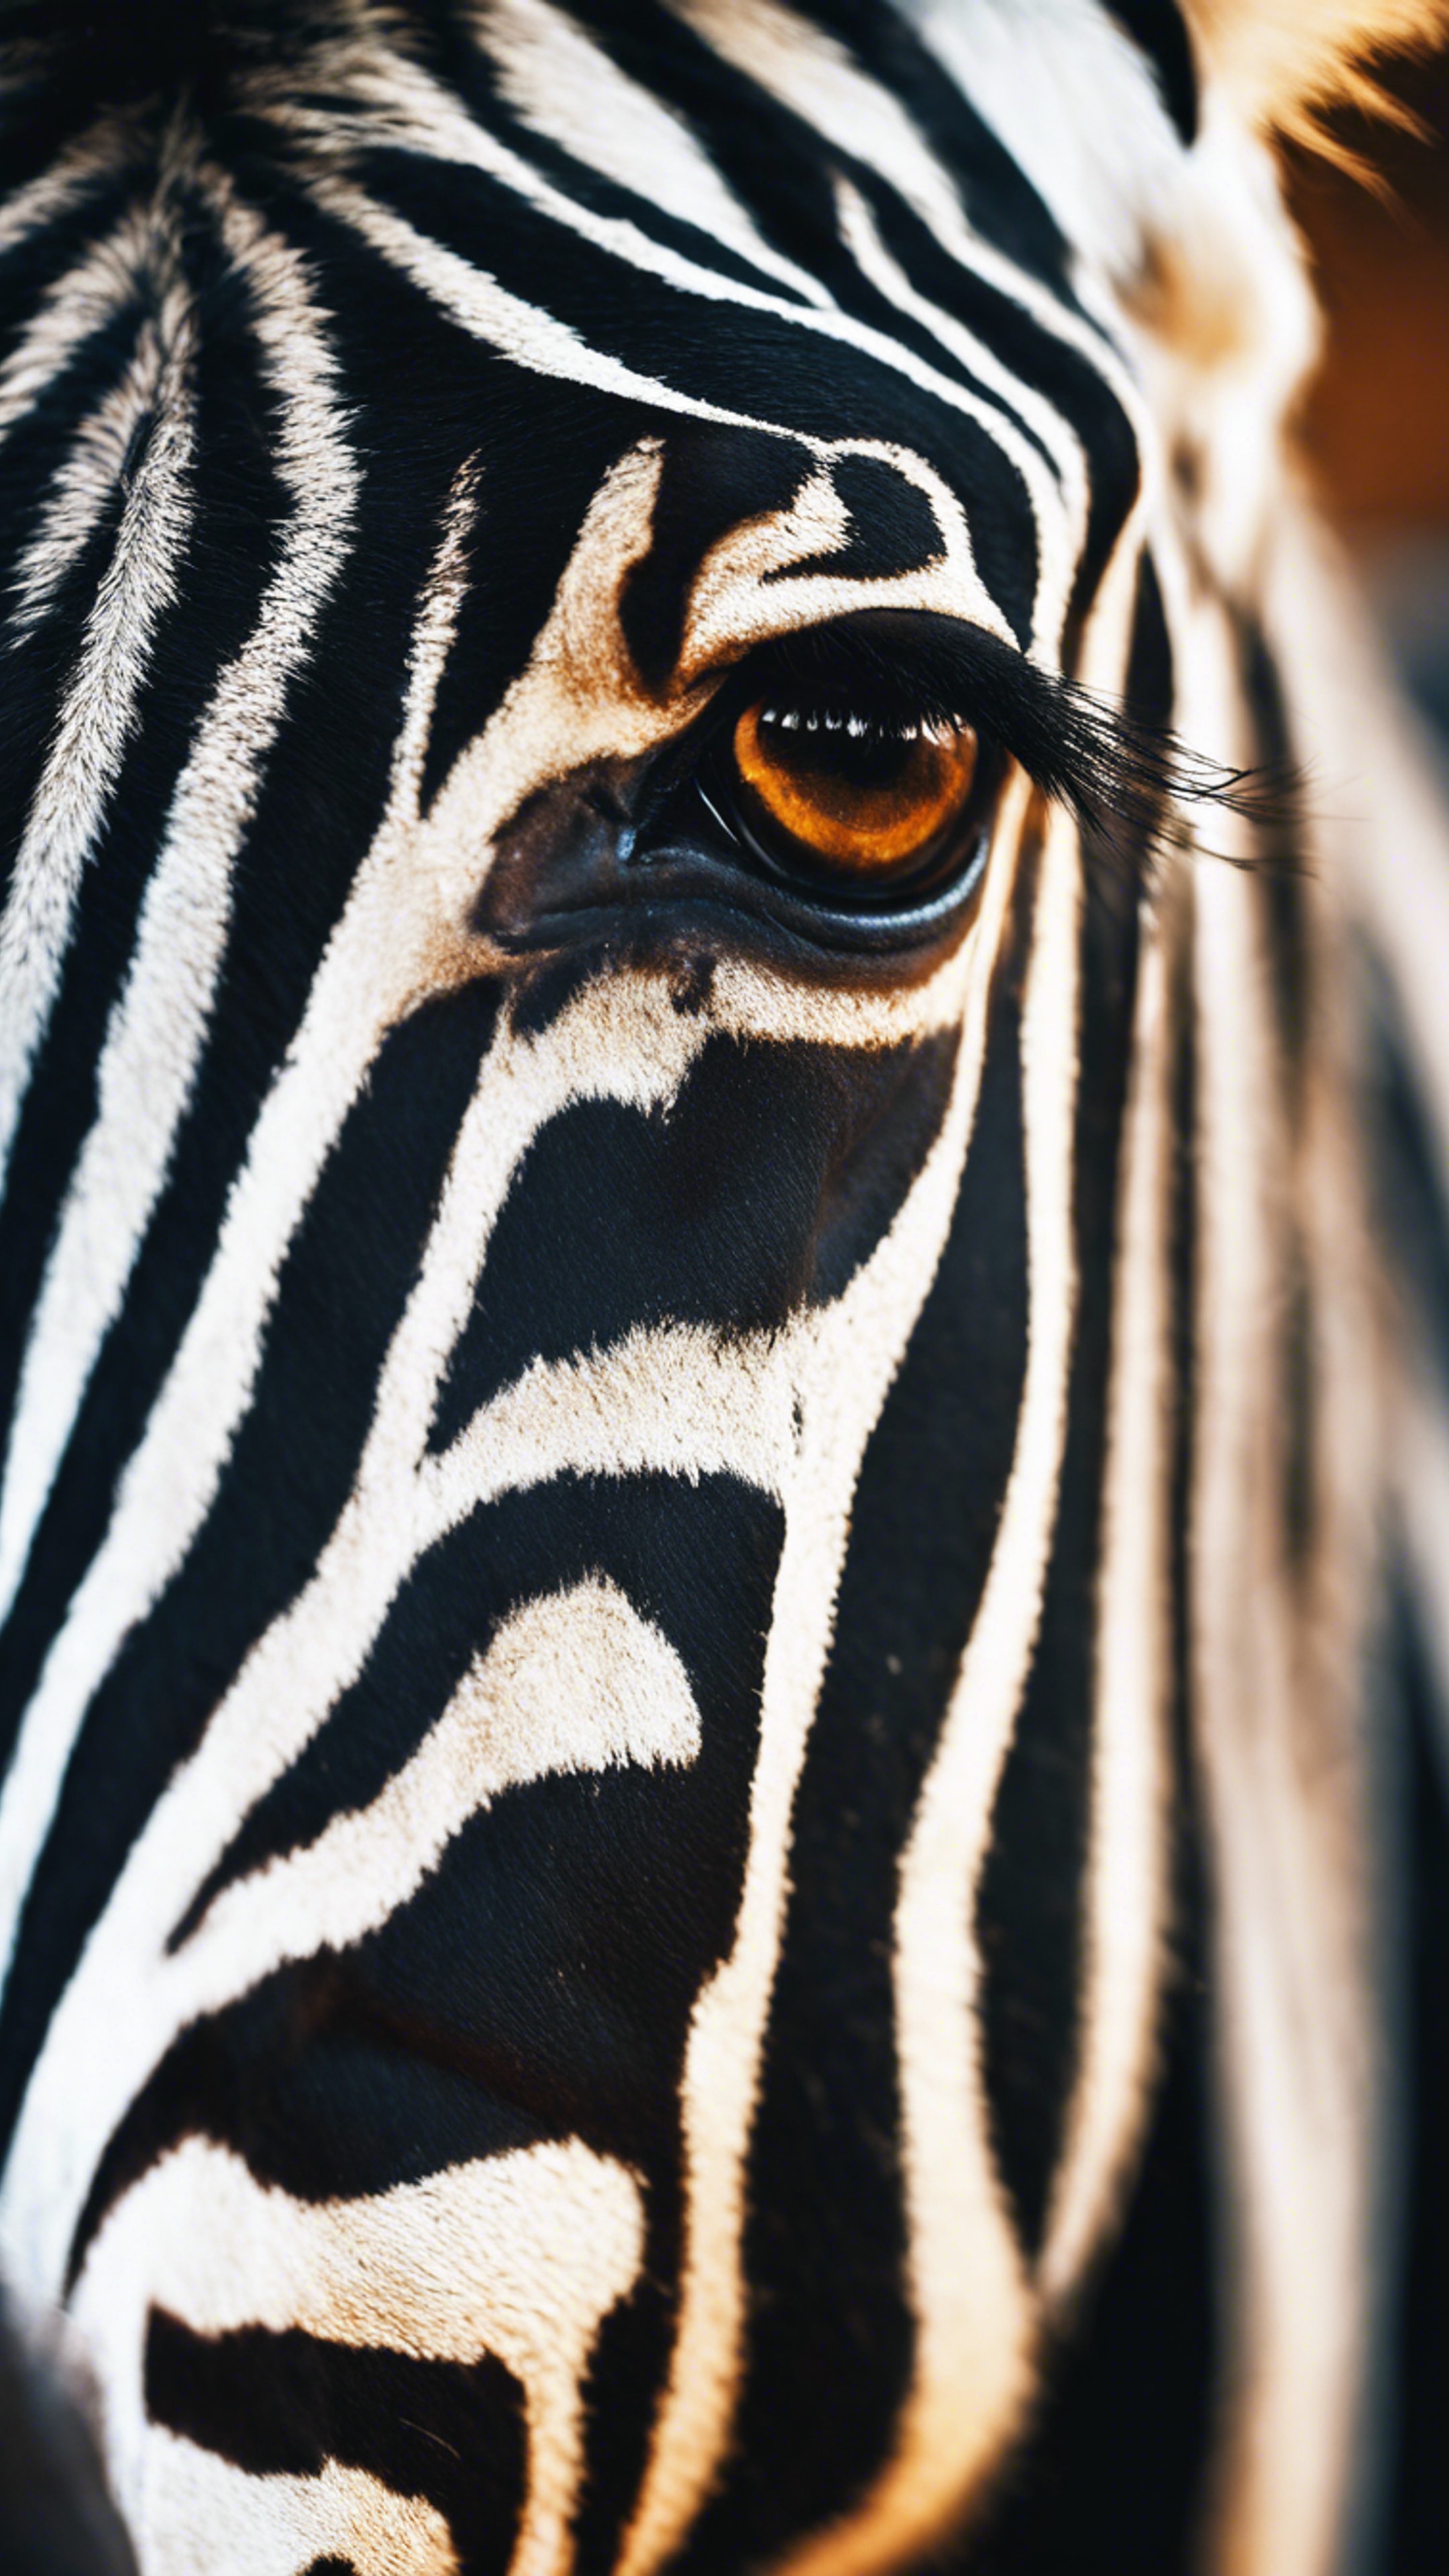 A close-up shot of a zebra's eye expressing strong emotions. Tapetai[ea30c6a0b471421fa723]